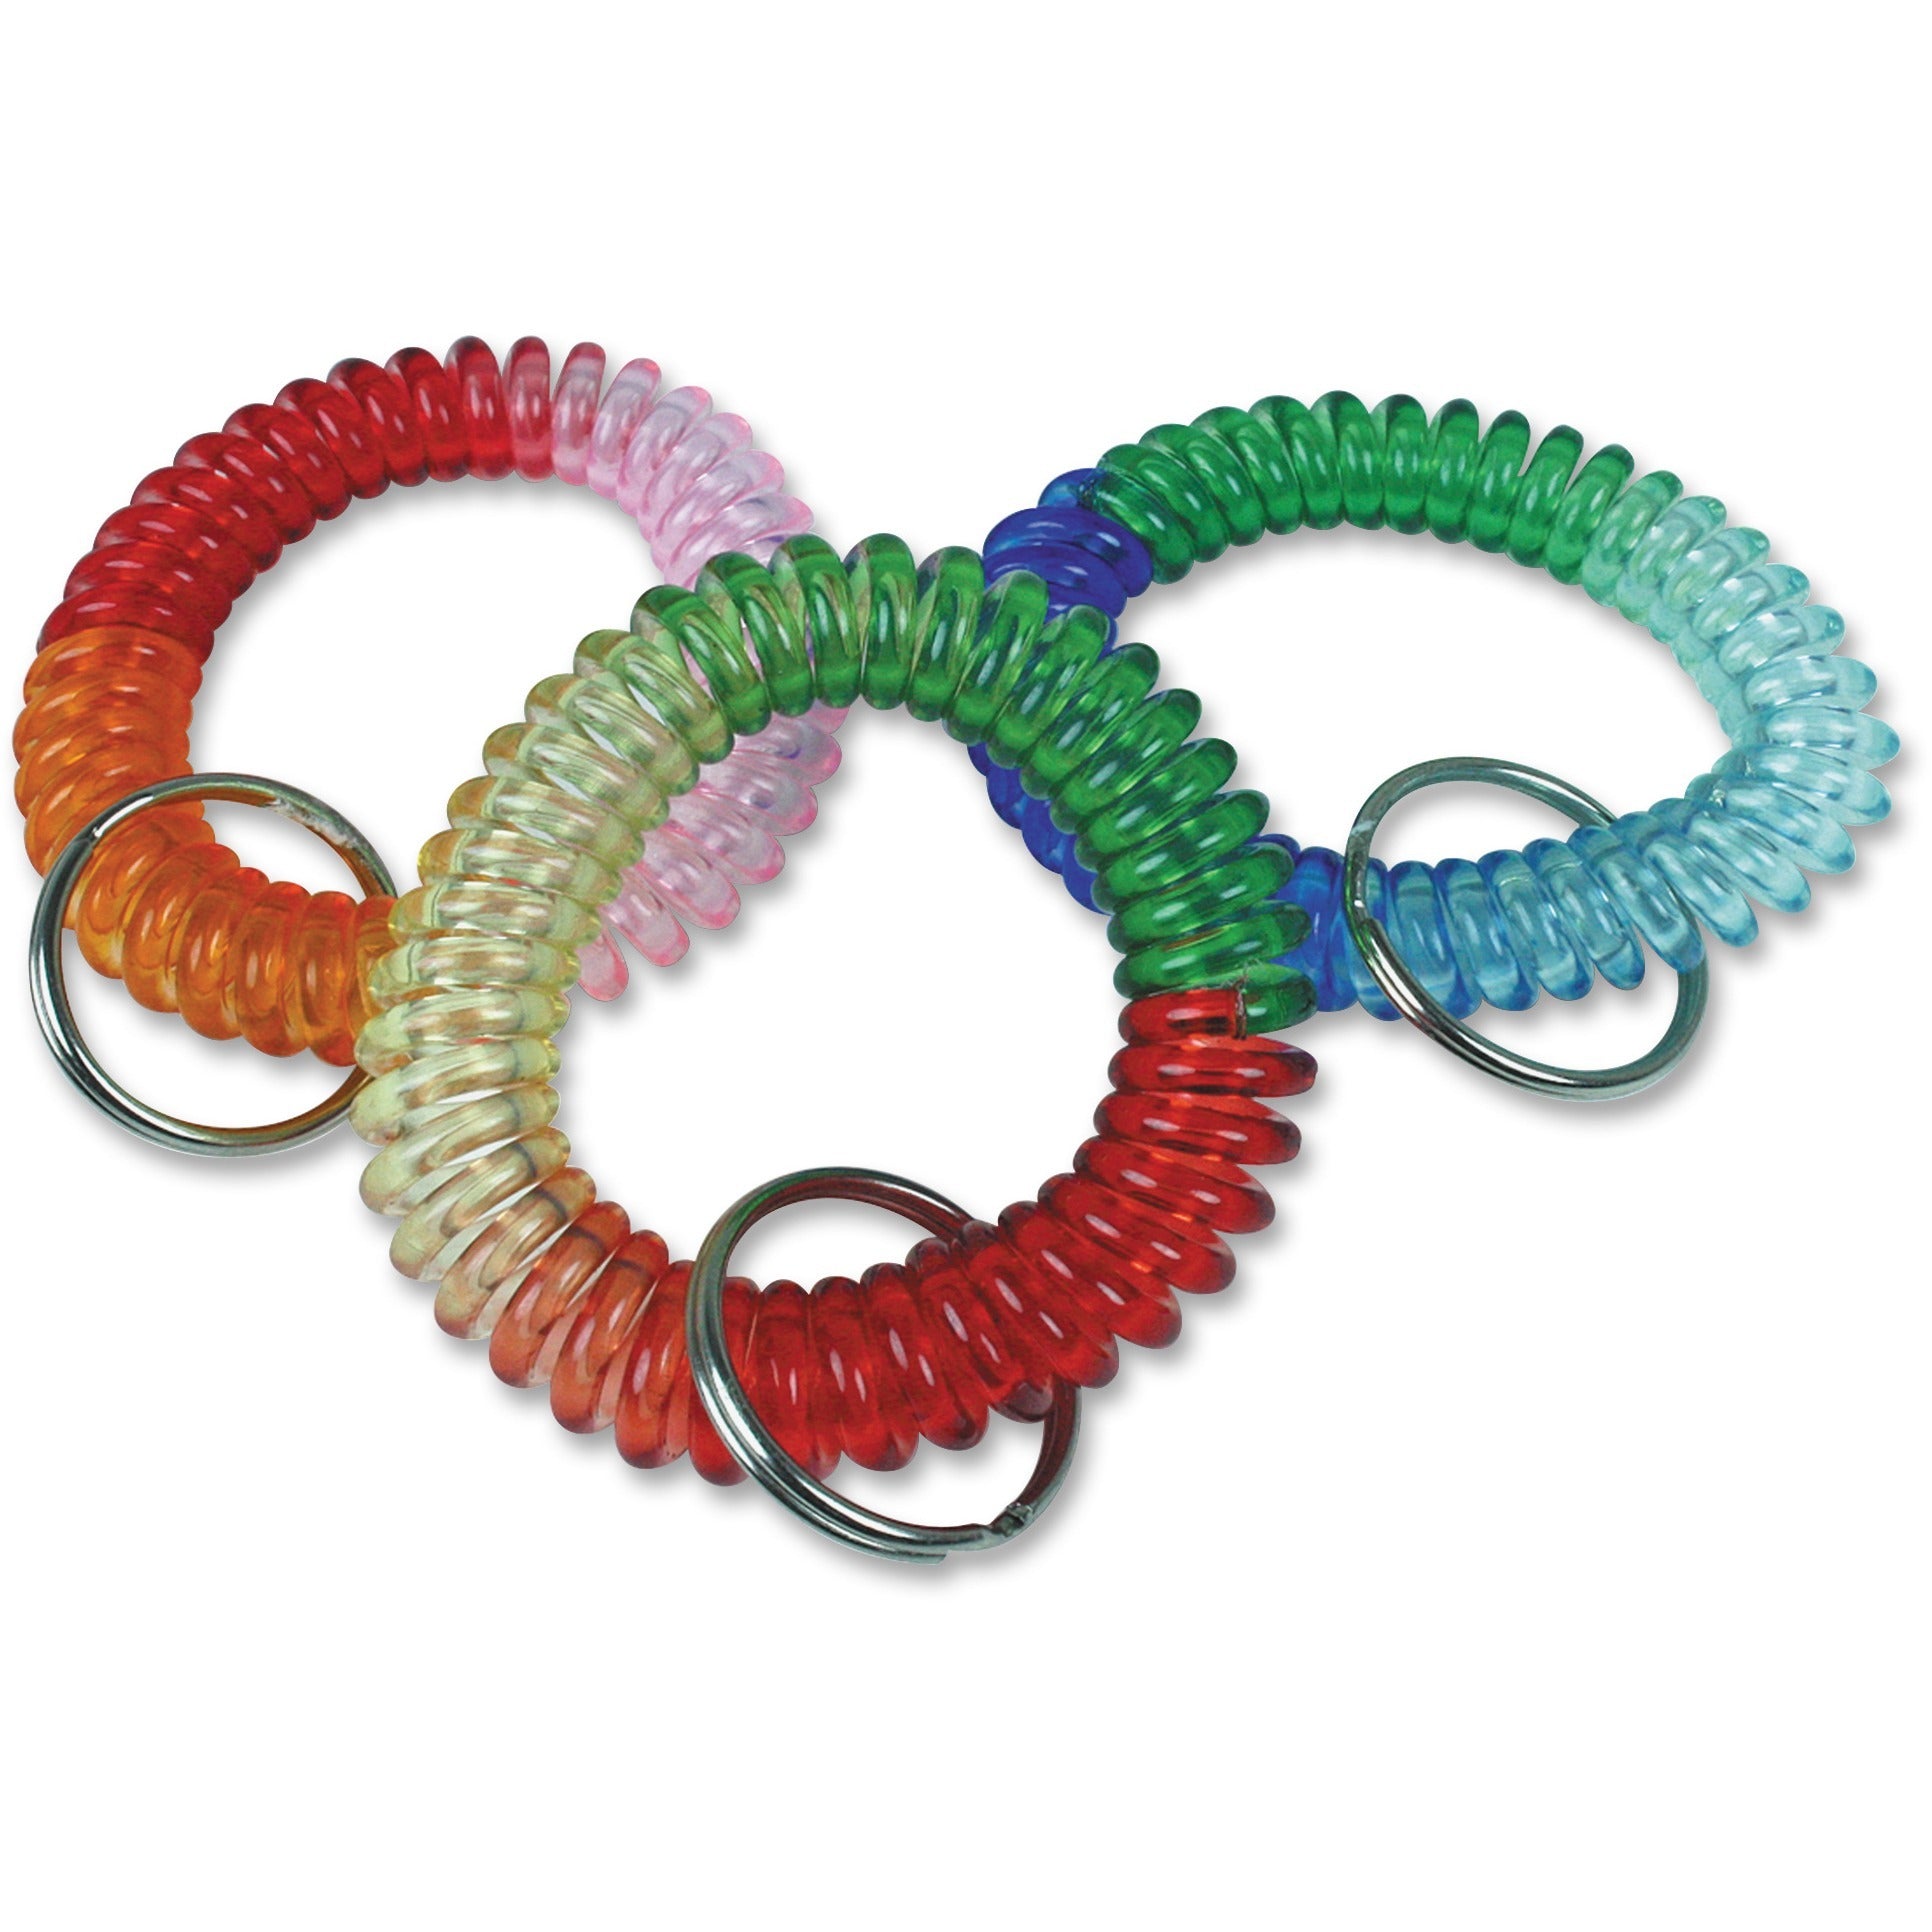 Amazon.com : Hedume 30 Pack Wrist Coil, 10-Colors Plastic Wristband,  Elastic Stretchable Spiral Bracelet, Key Ring Key Chain for Gym, Pool, ID  Badge, Outdoor Sports, Office, Workshop, Shopping Mall, Sauna : Office  Products